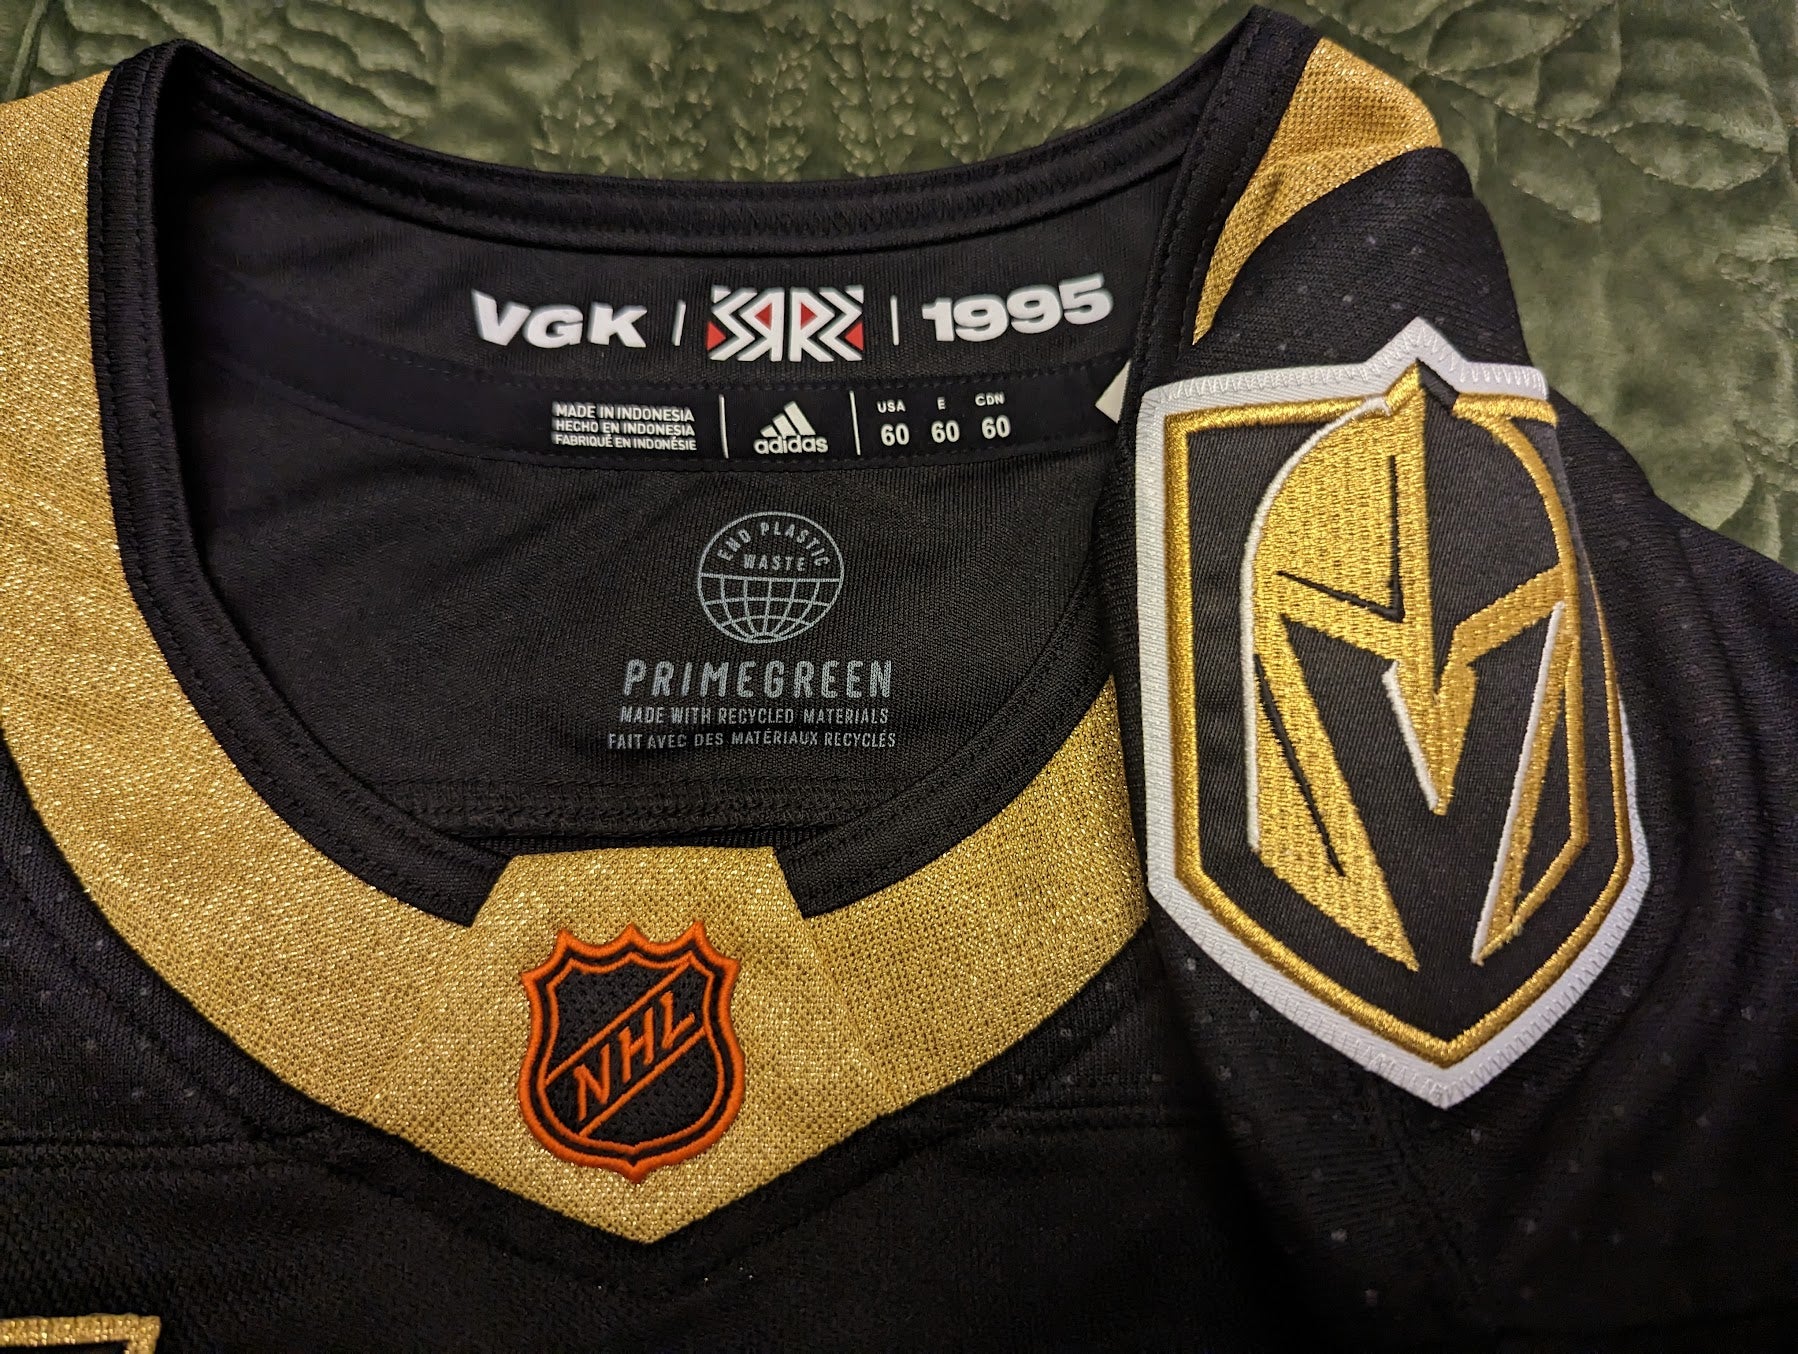 Brand New Men's Vegas Golden Knights Adidas Red Reverse Retro Player Size  52 Large Jersey